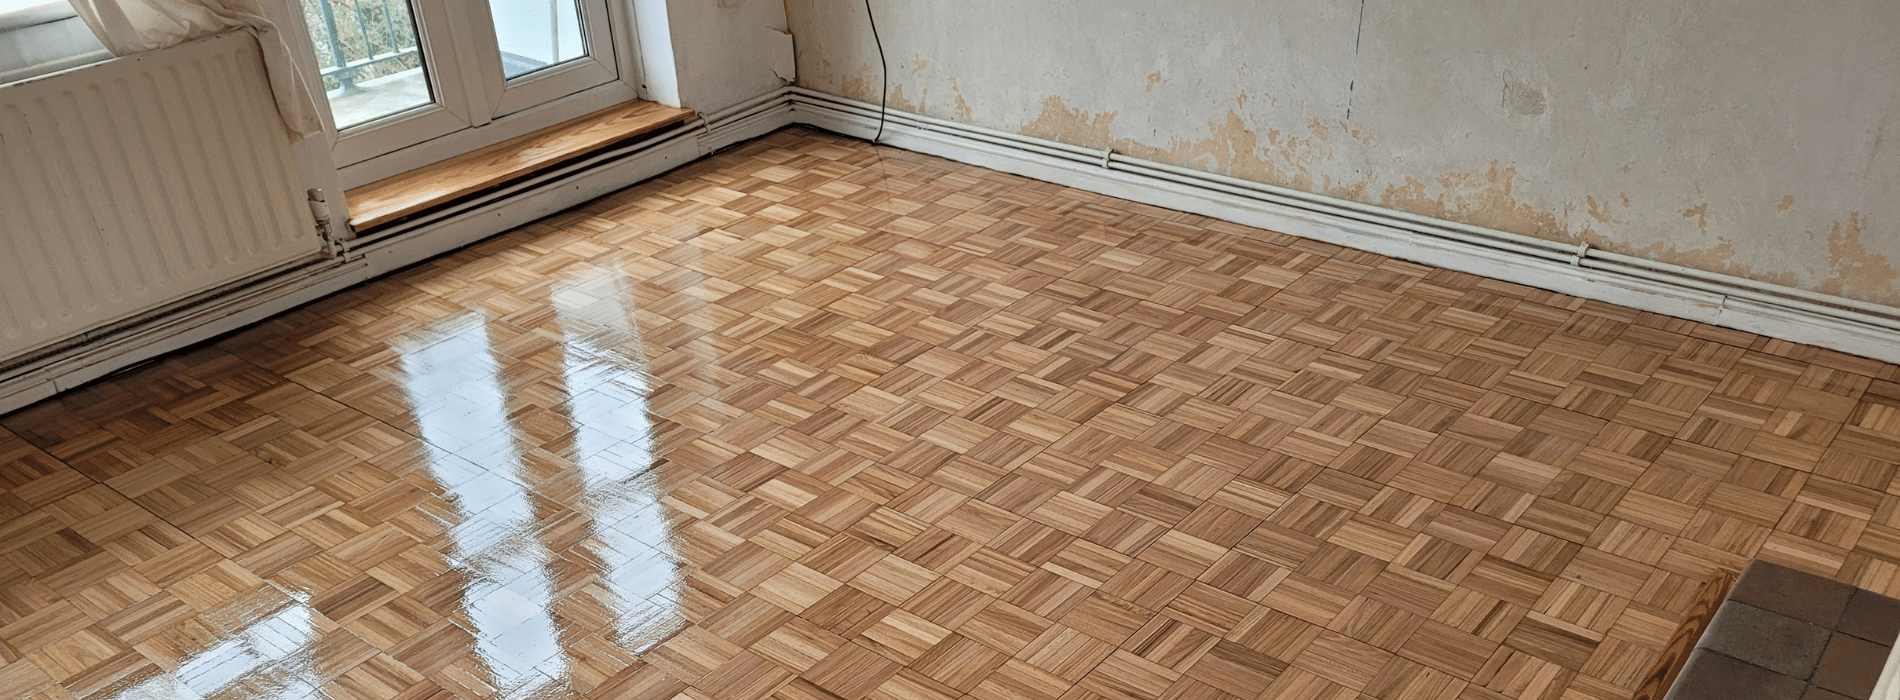 Expertly restored 6-year-old hardwood floor in Brick Lane, E1. Mr Sander® used Bona 2.5K Frost whitewashing and Traffic HD 20% sheen matte lacquer. Durable and stunning, this finish guarantees long-lasting beauty. 